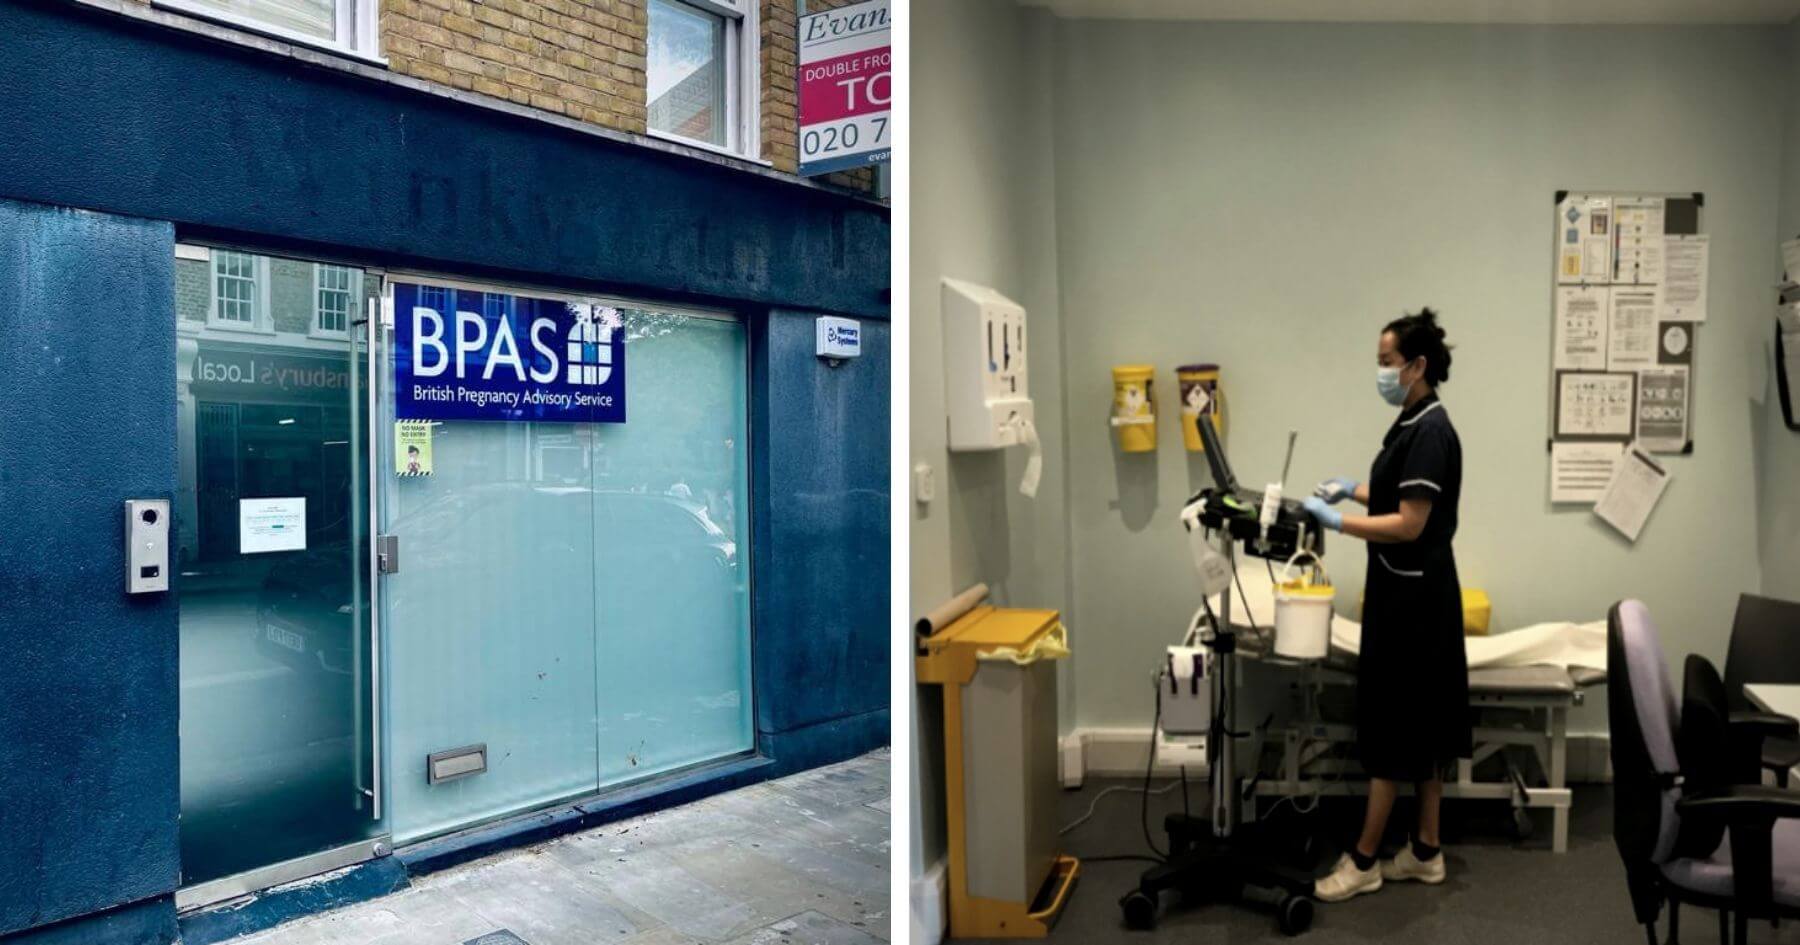 BPAS open clinic to replace facility where “women were treated like animals”